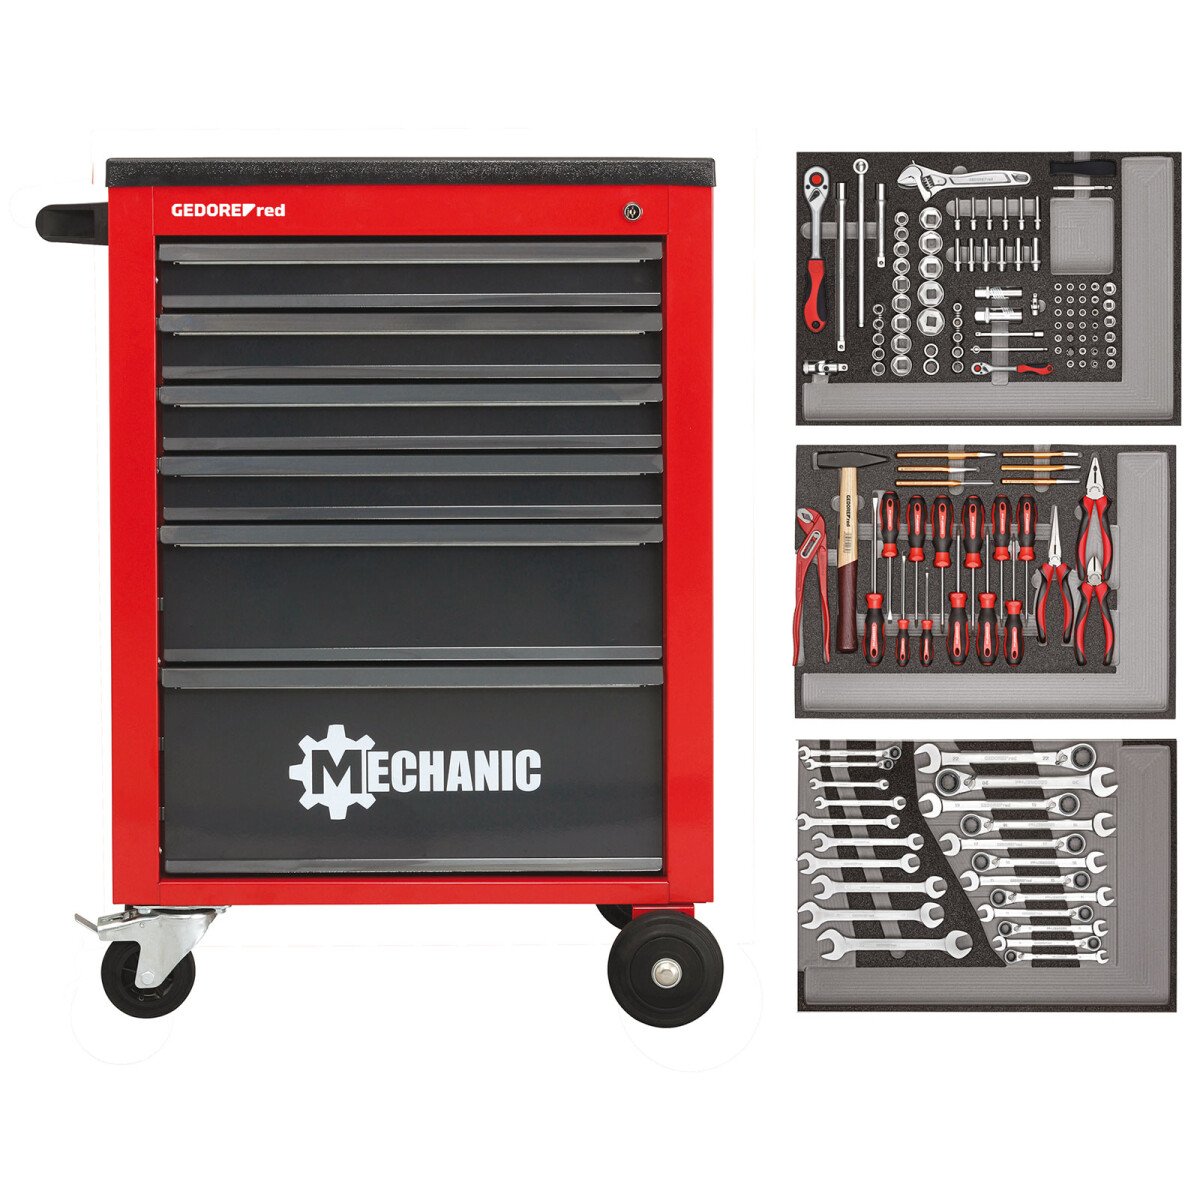 Gedore RED 3301673 Mechanic Workshop Trolley with 129 Piece Toolset